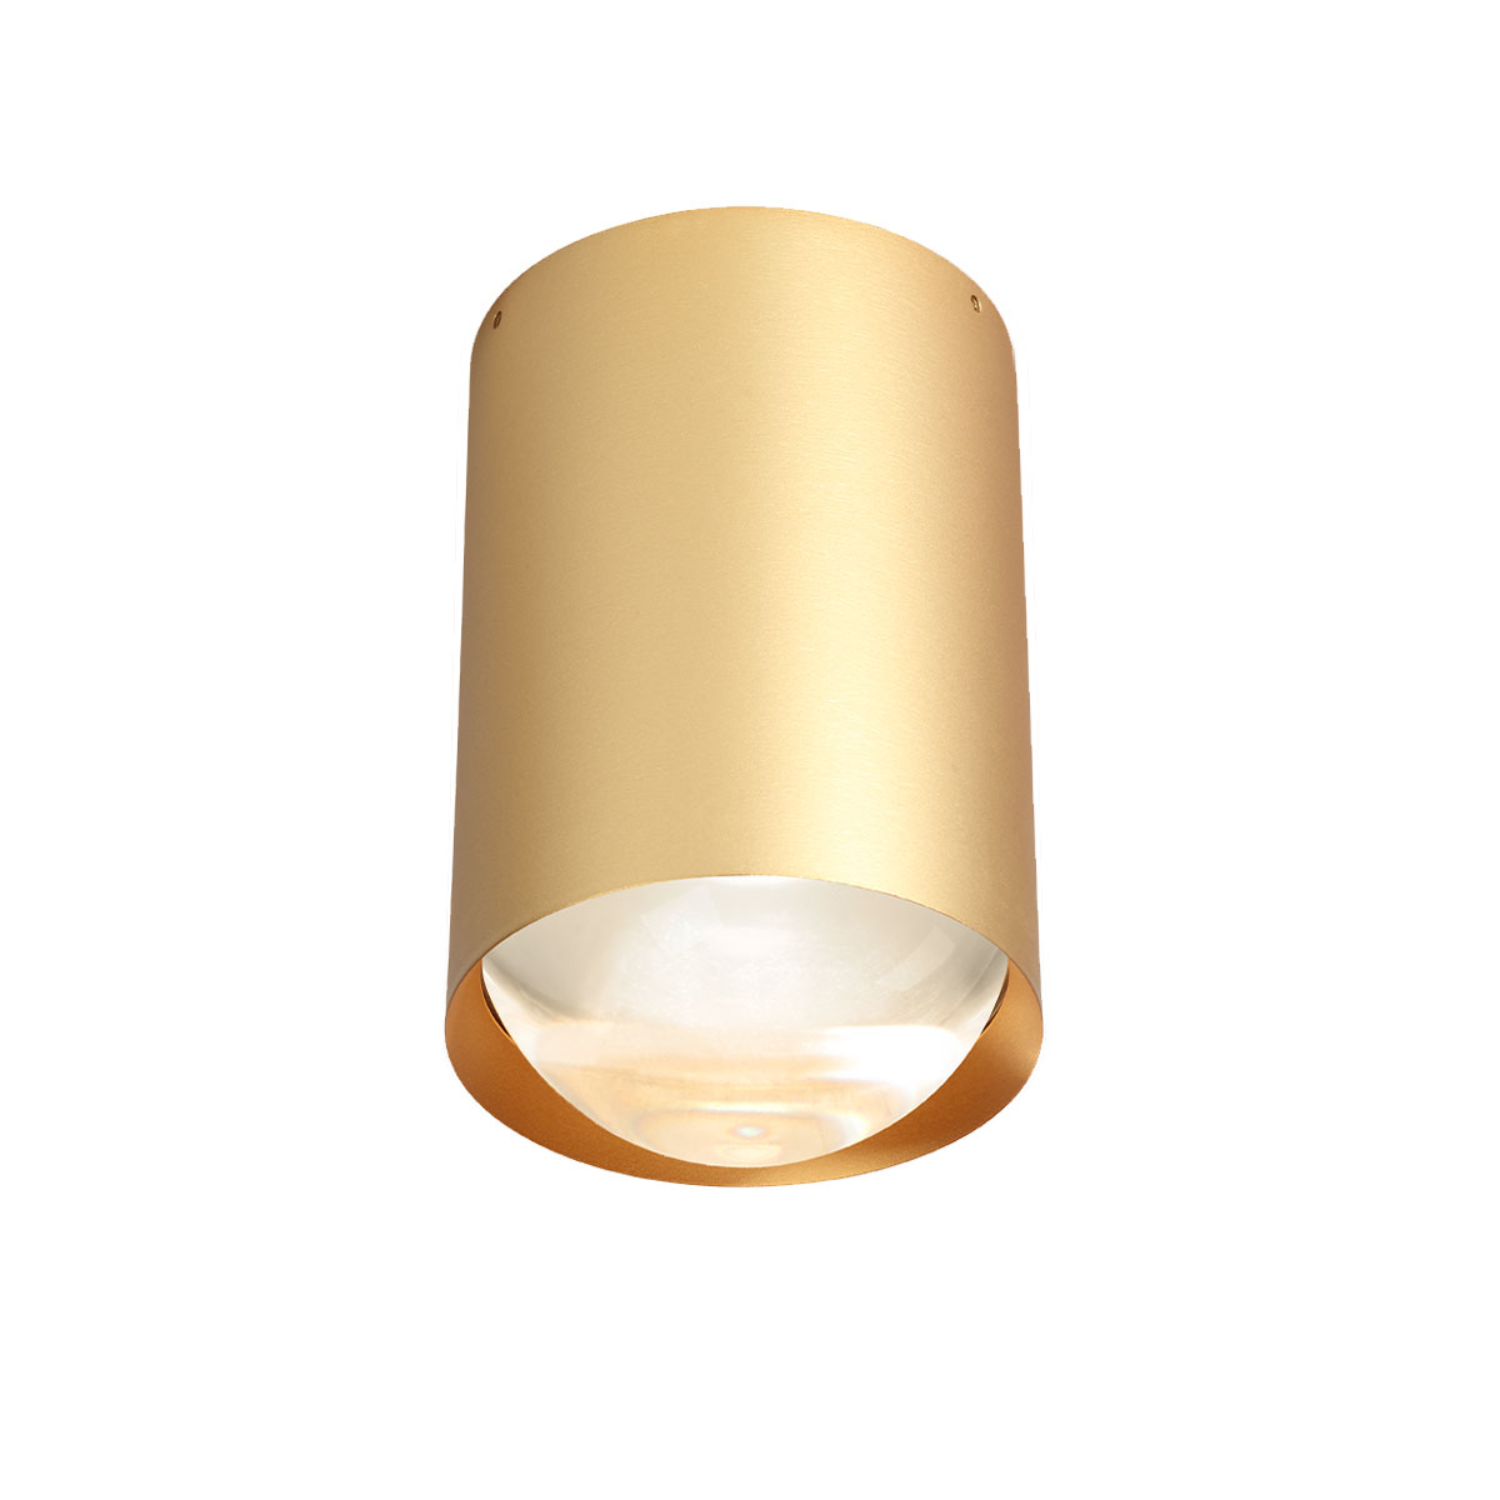 BILY 16-UP OUT - Ceiling Light